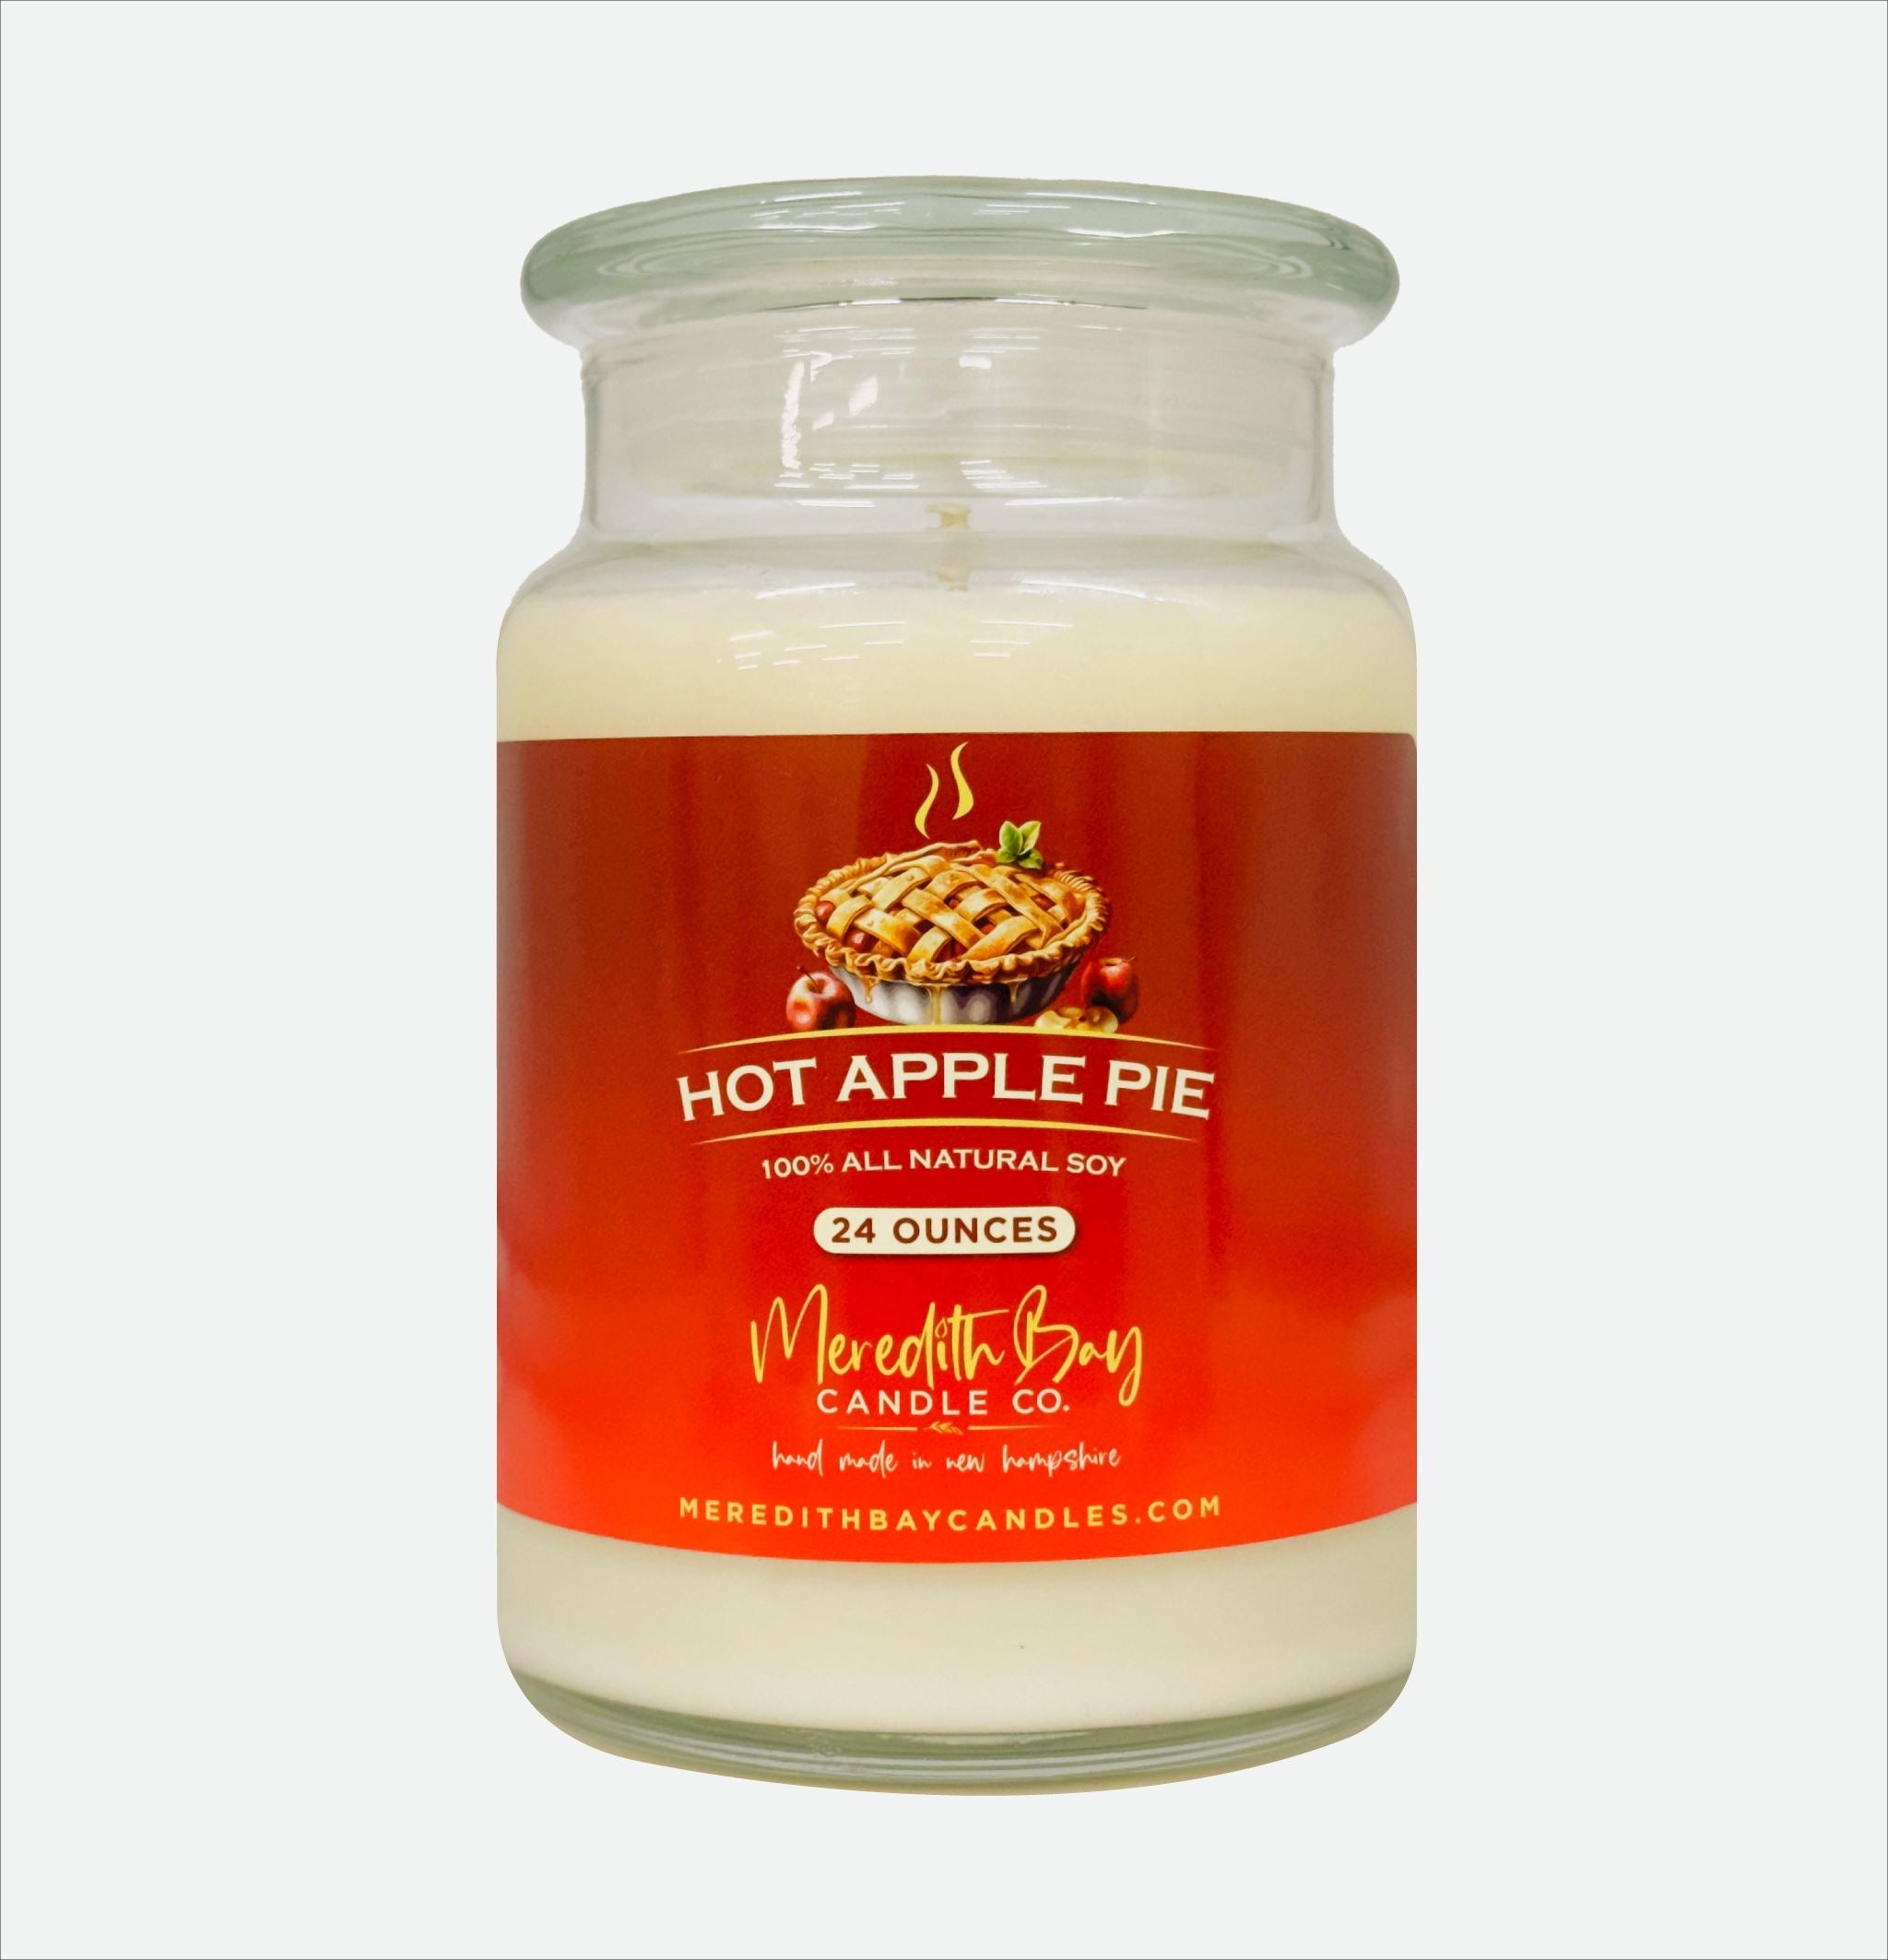 Hot Apple Pie Soy Candle Meredith Bay Candle Co 24 Oz 